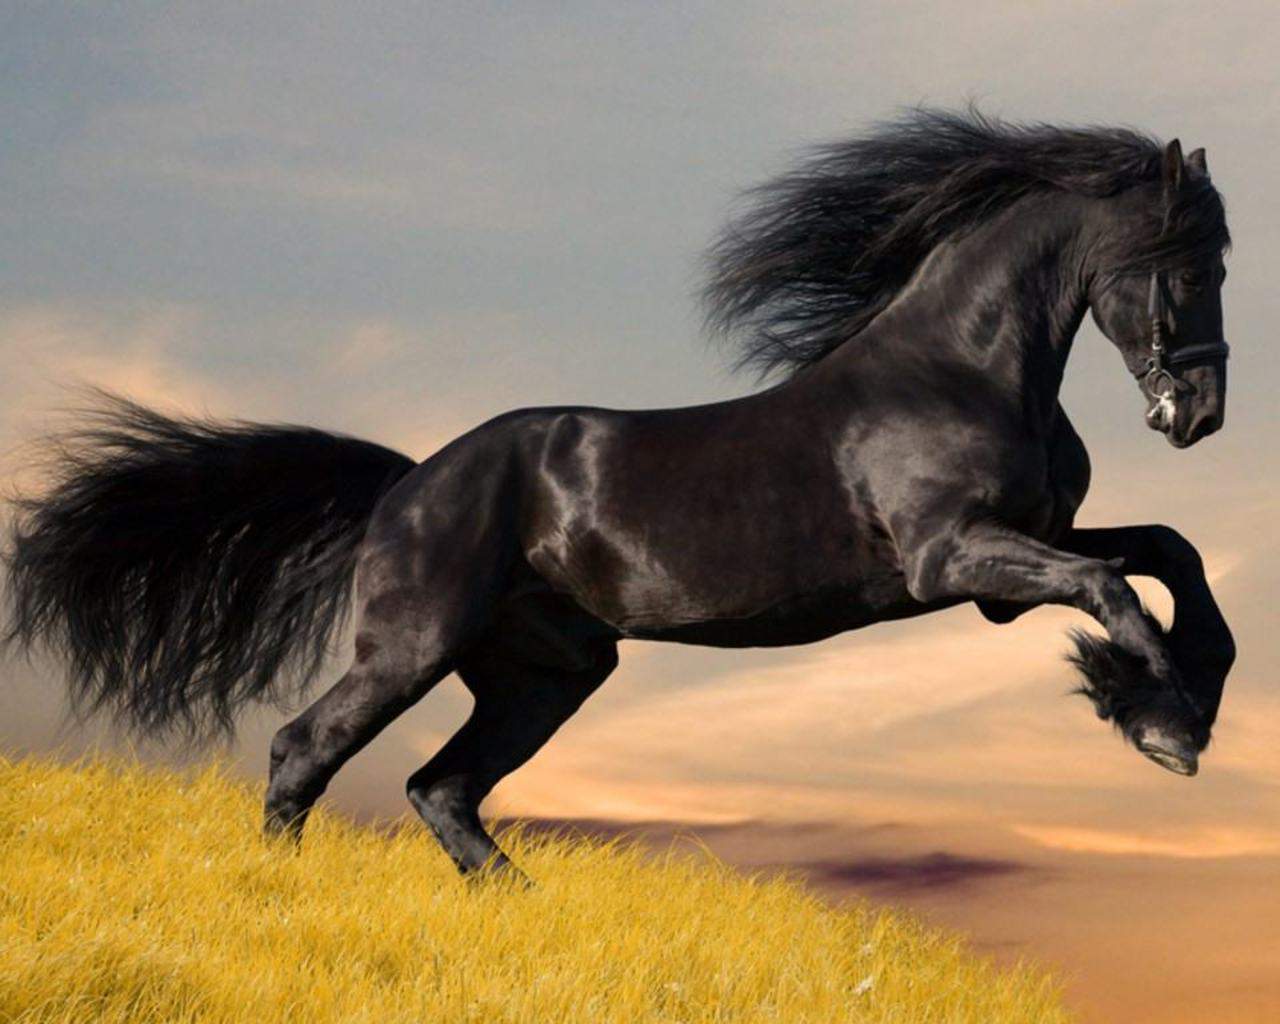 Horse Breeds - Pictures, Description and Information